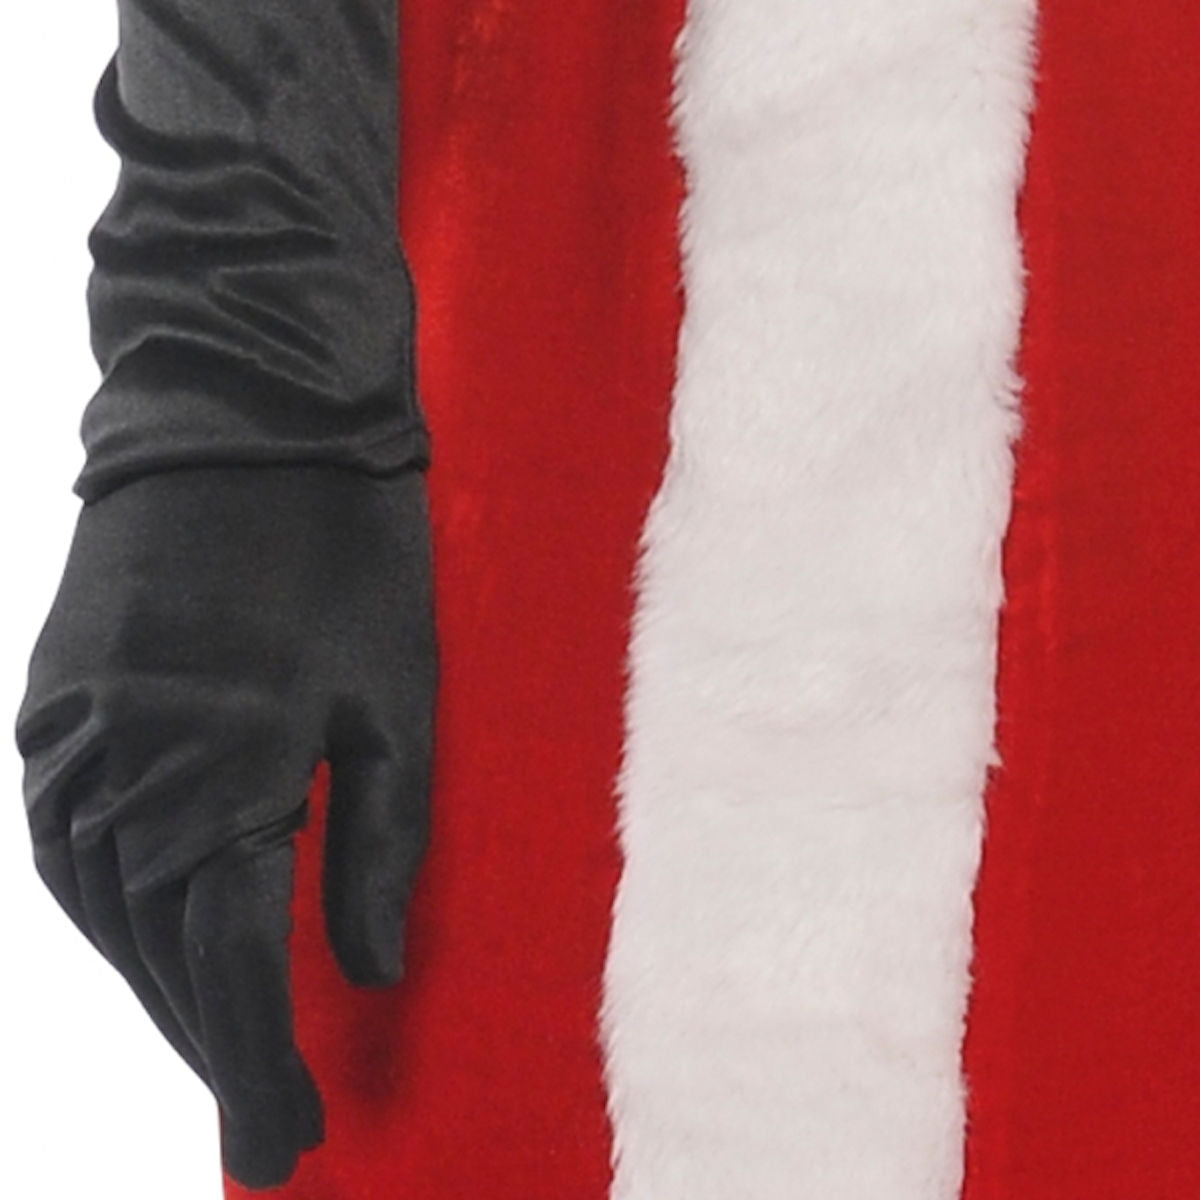 Jolly Holly Women's Christmas Santa Costume with Gloves